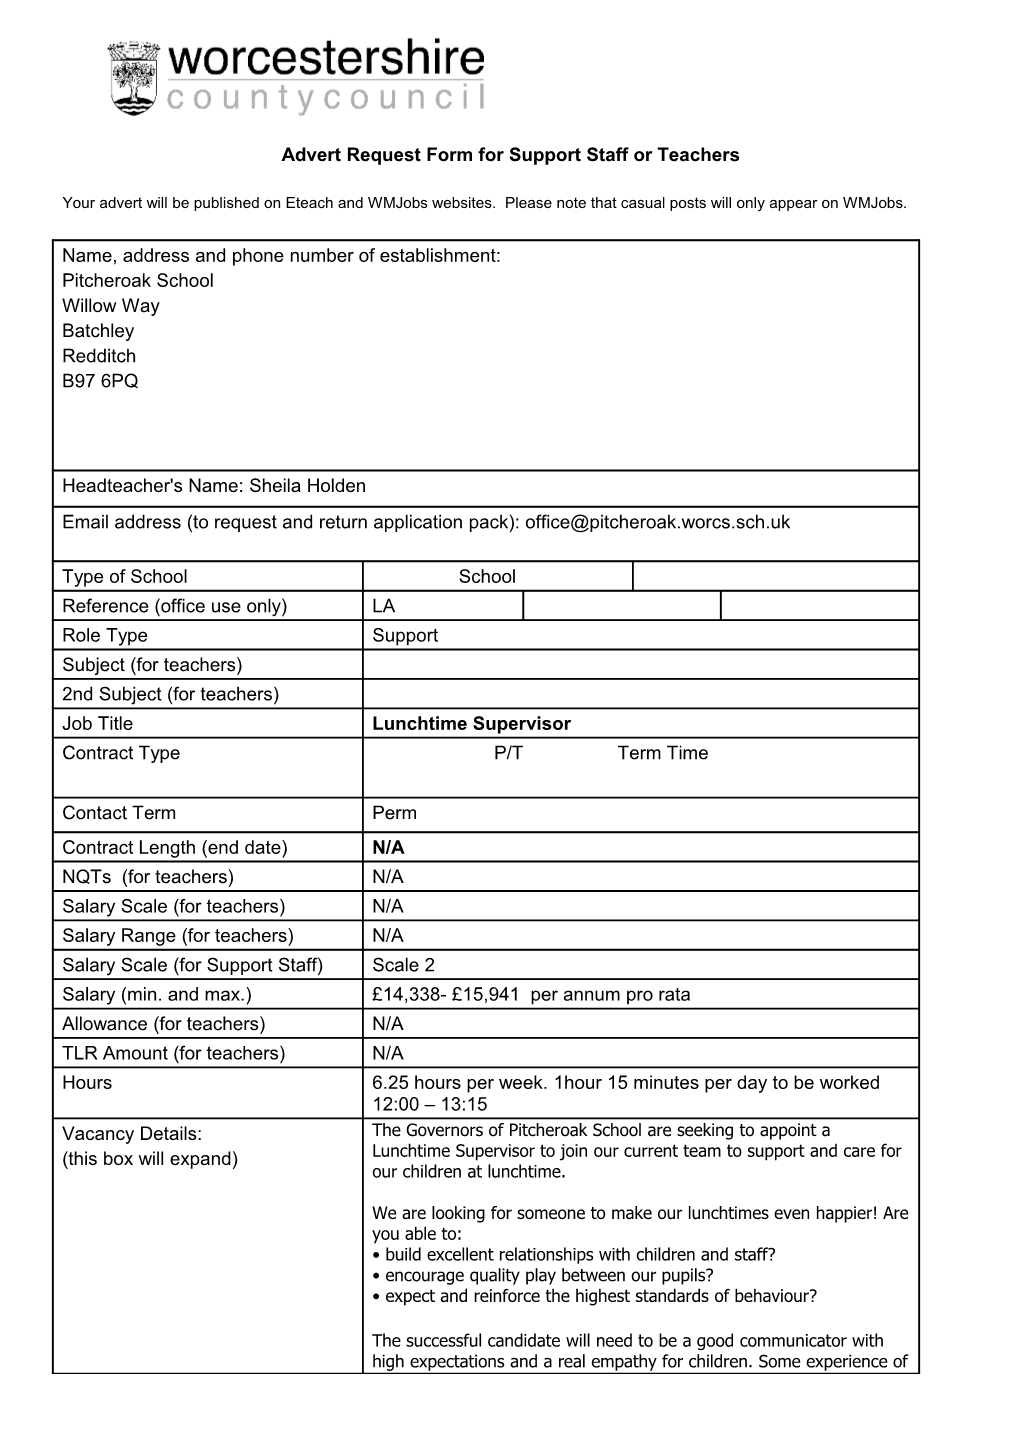 Advert Request Form for Support Staff Or Teachers